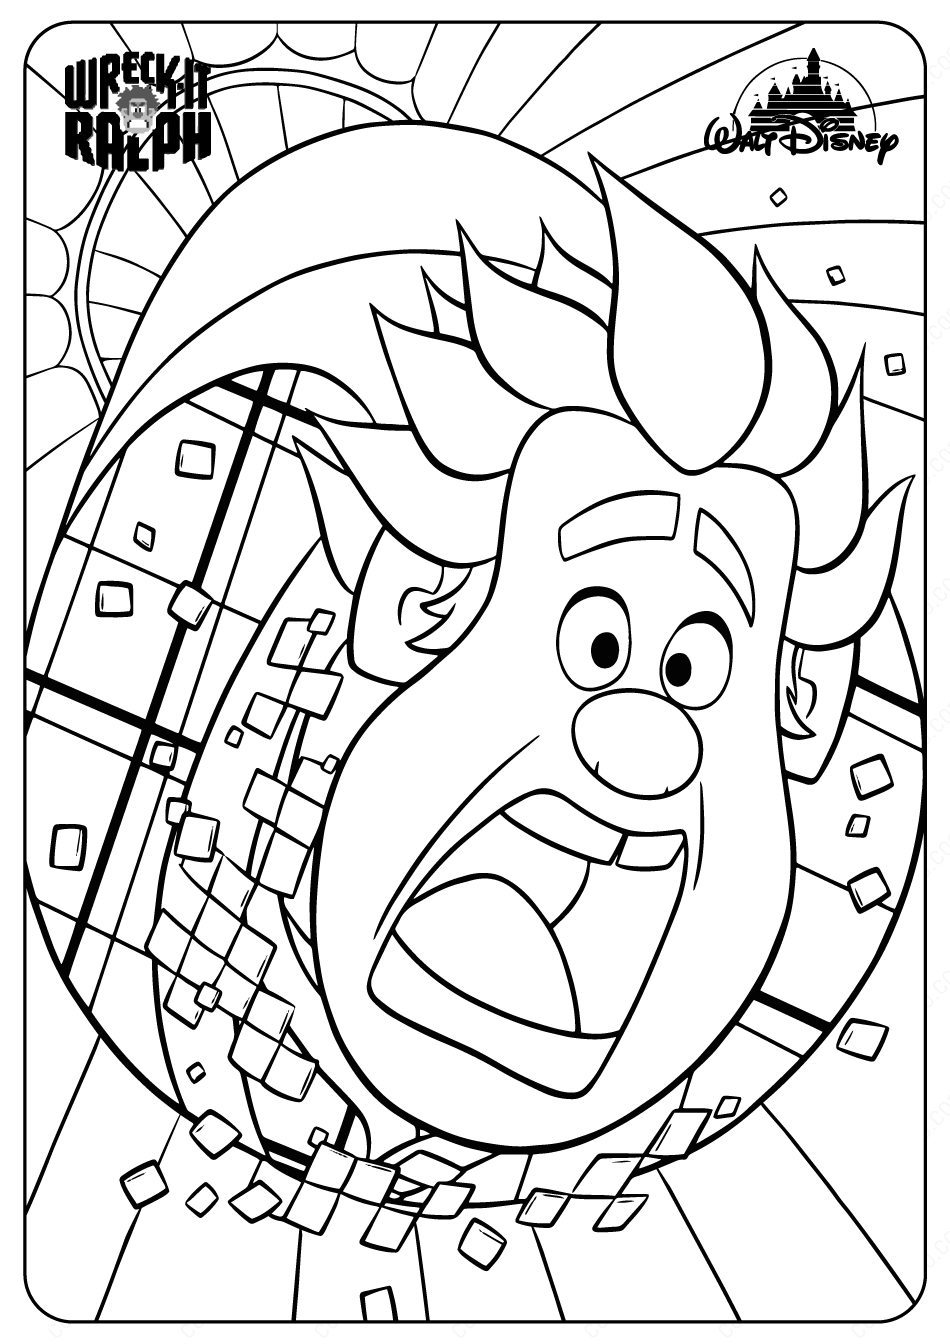 disney wreck it wifi ralph coloring pages